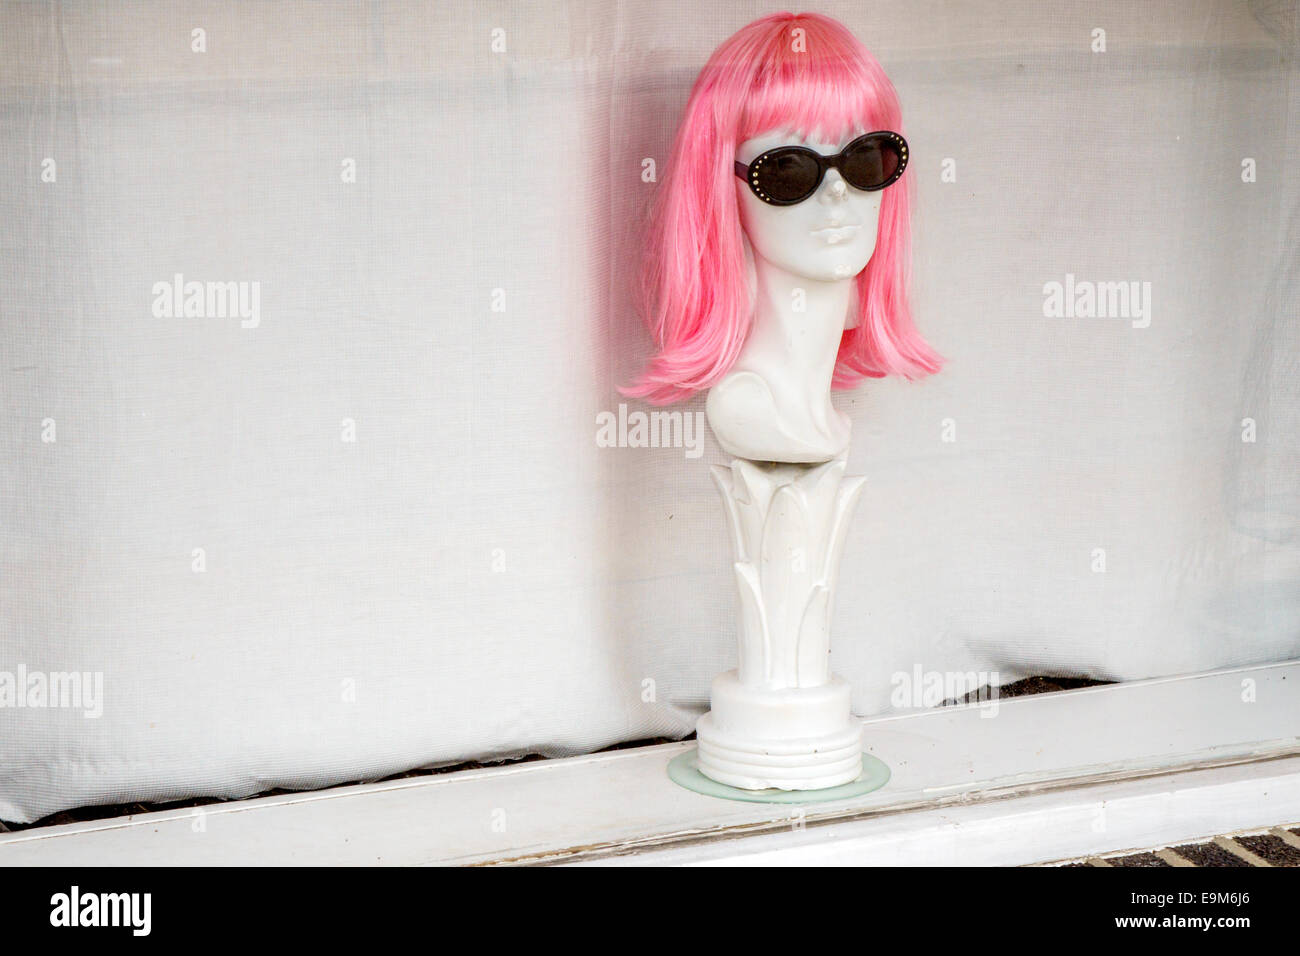 Pvc Bald Mannequin Head Model Wig Making Masks Hats Glasses Stand Display Manikin  Head Modelwithout Makeup